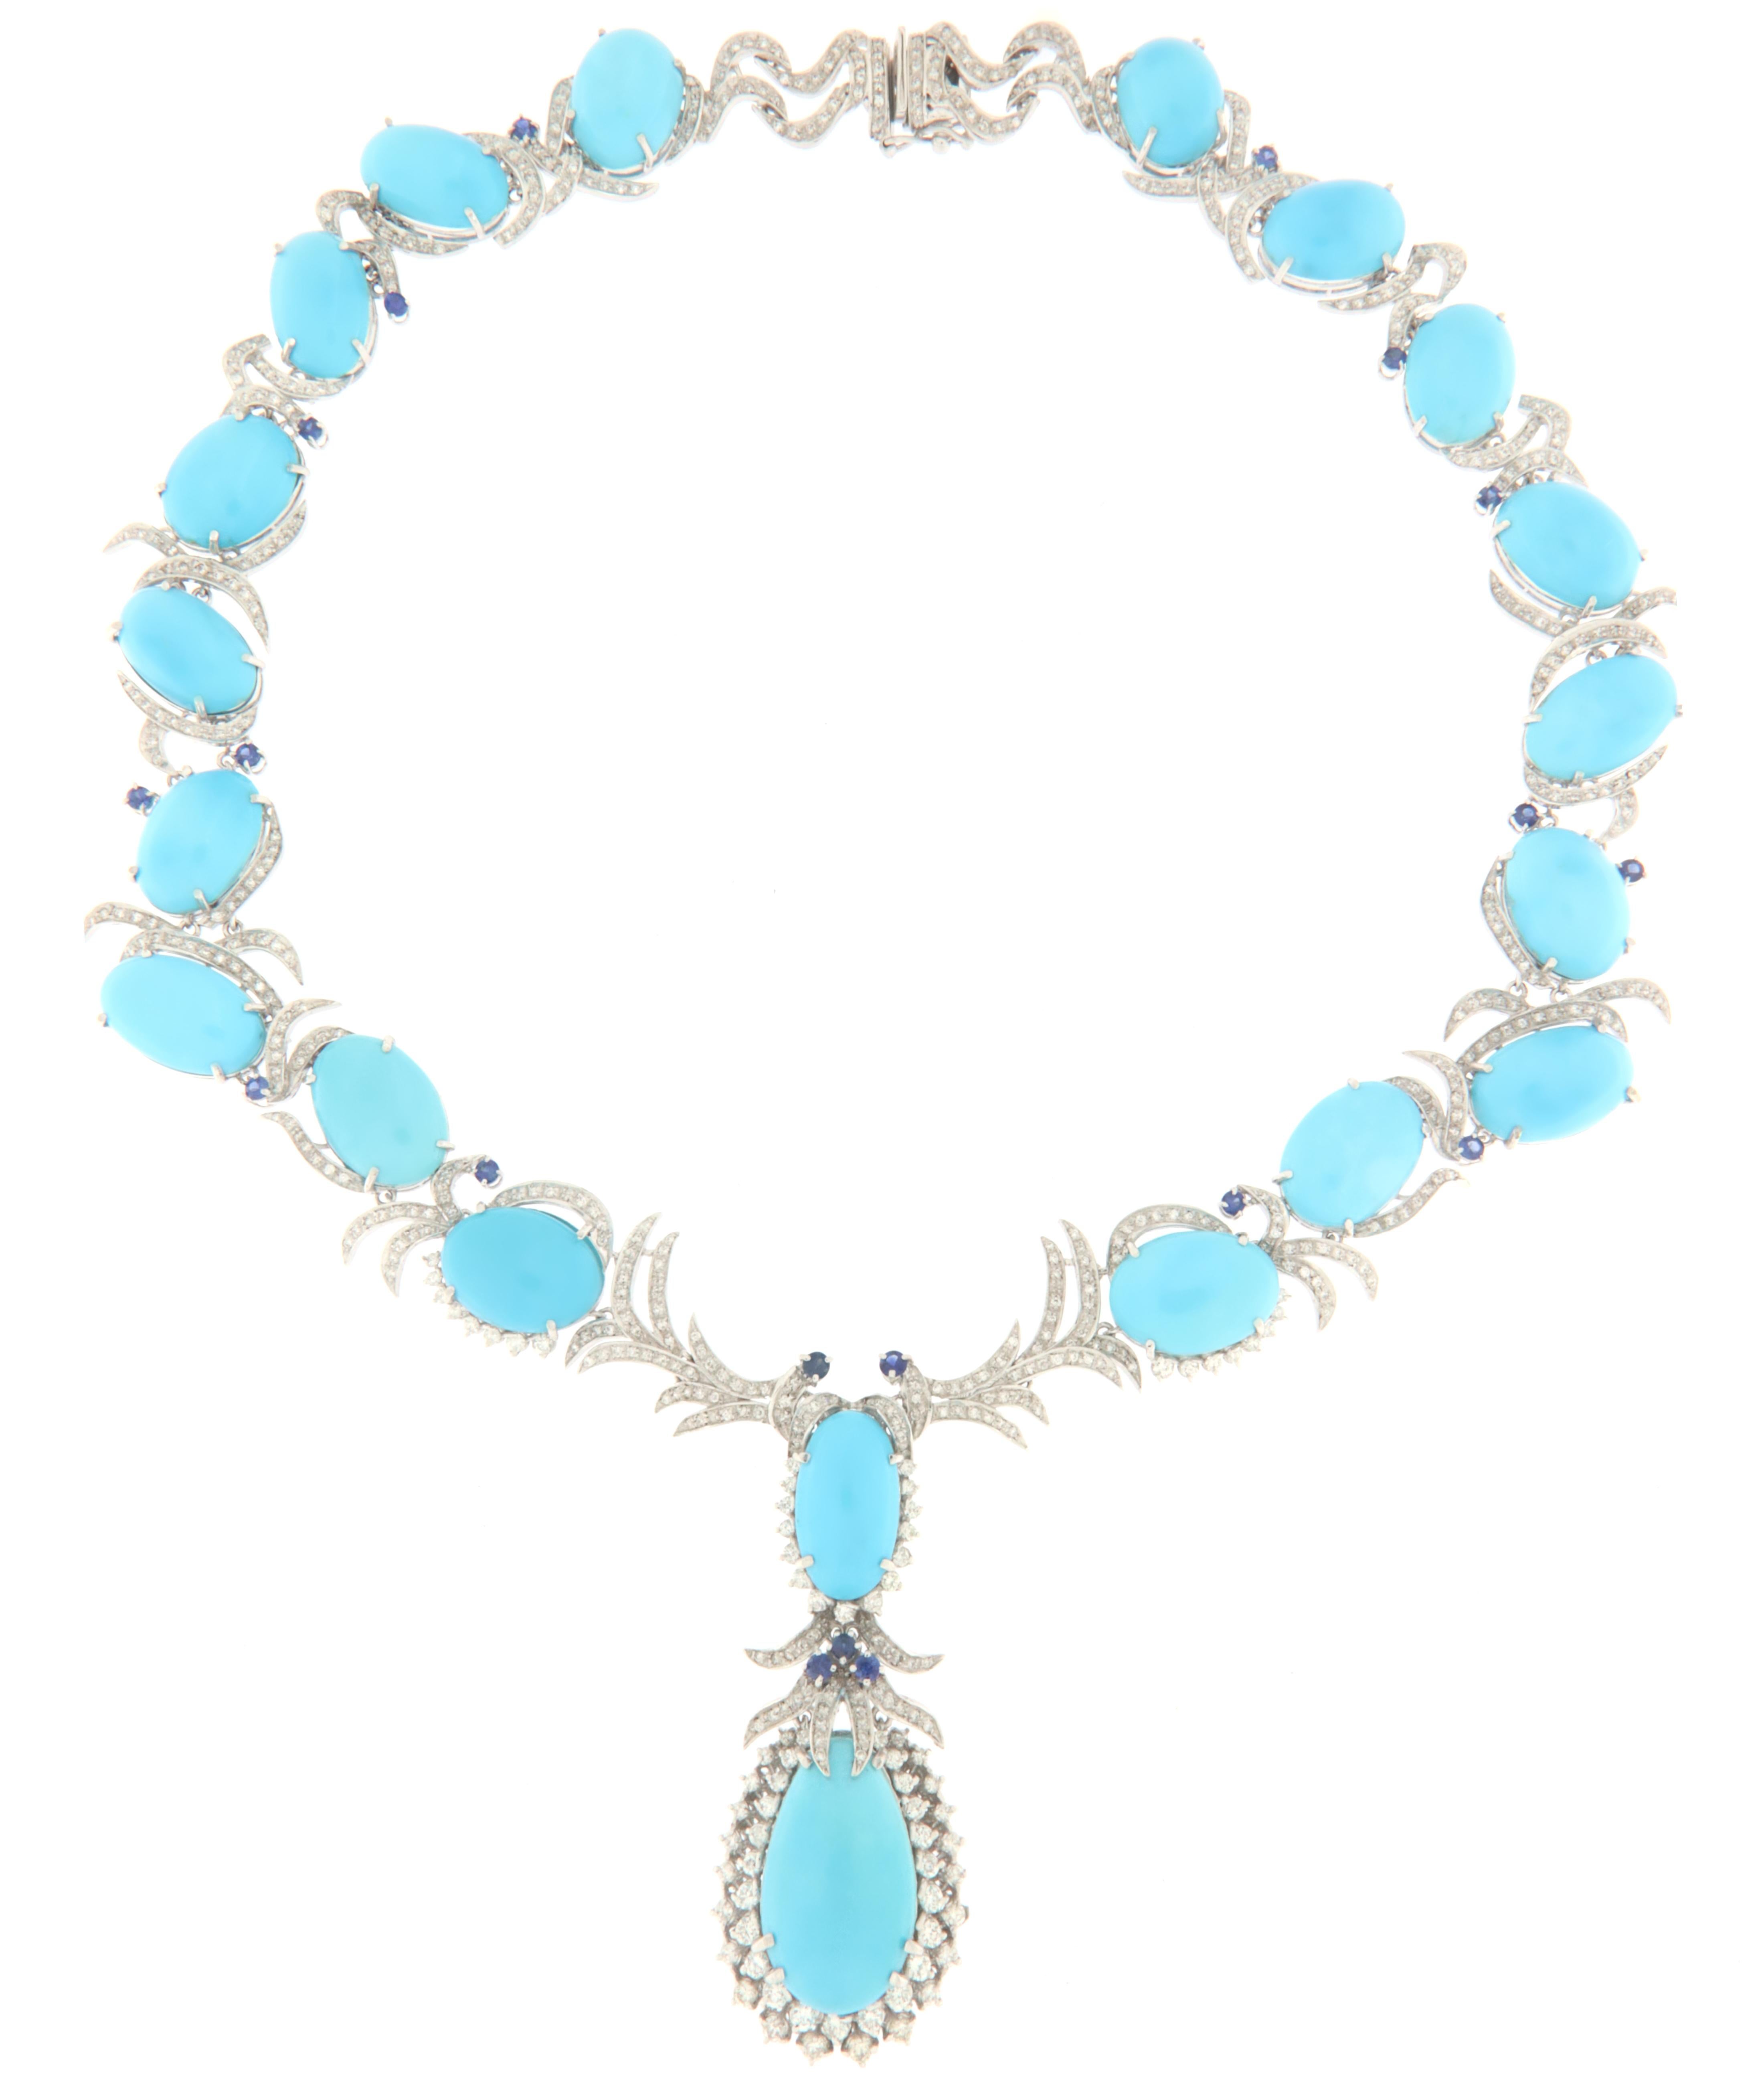 Fantastic parure made entirely by hand by expert master craftsmen. Made of 18 Karat white gold with natural diamonds,sapphires and turquoise.
A parure to be exhibited on any occasion, simple but at the same time very impactful, in short, a jewel